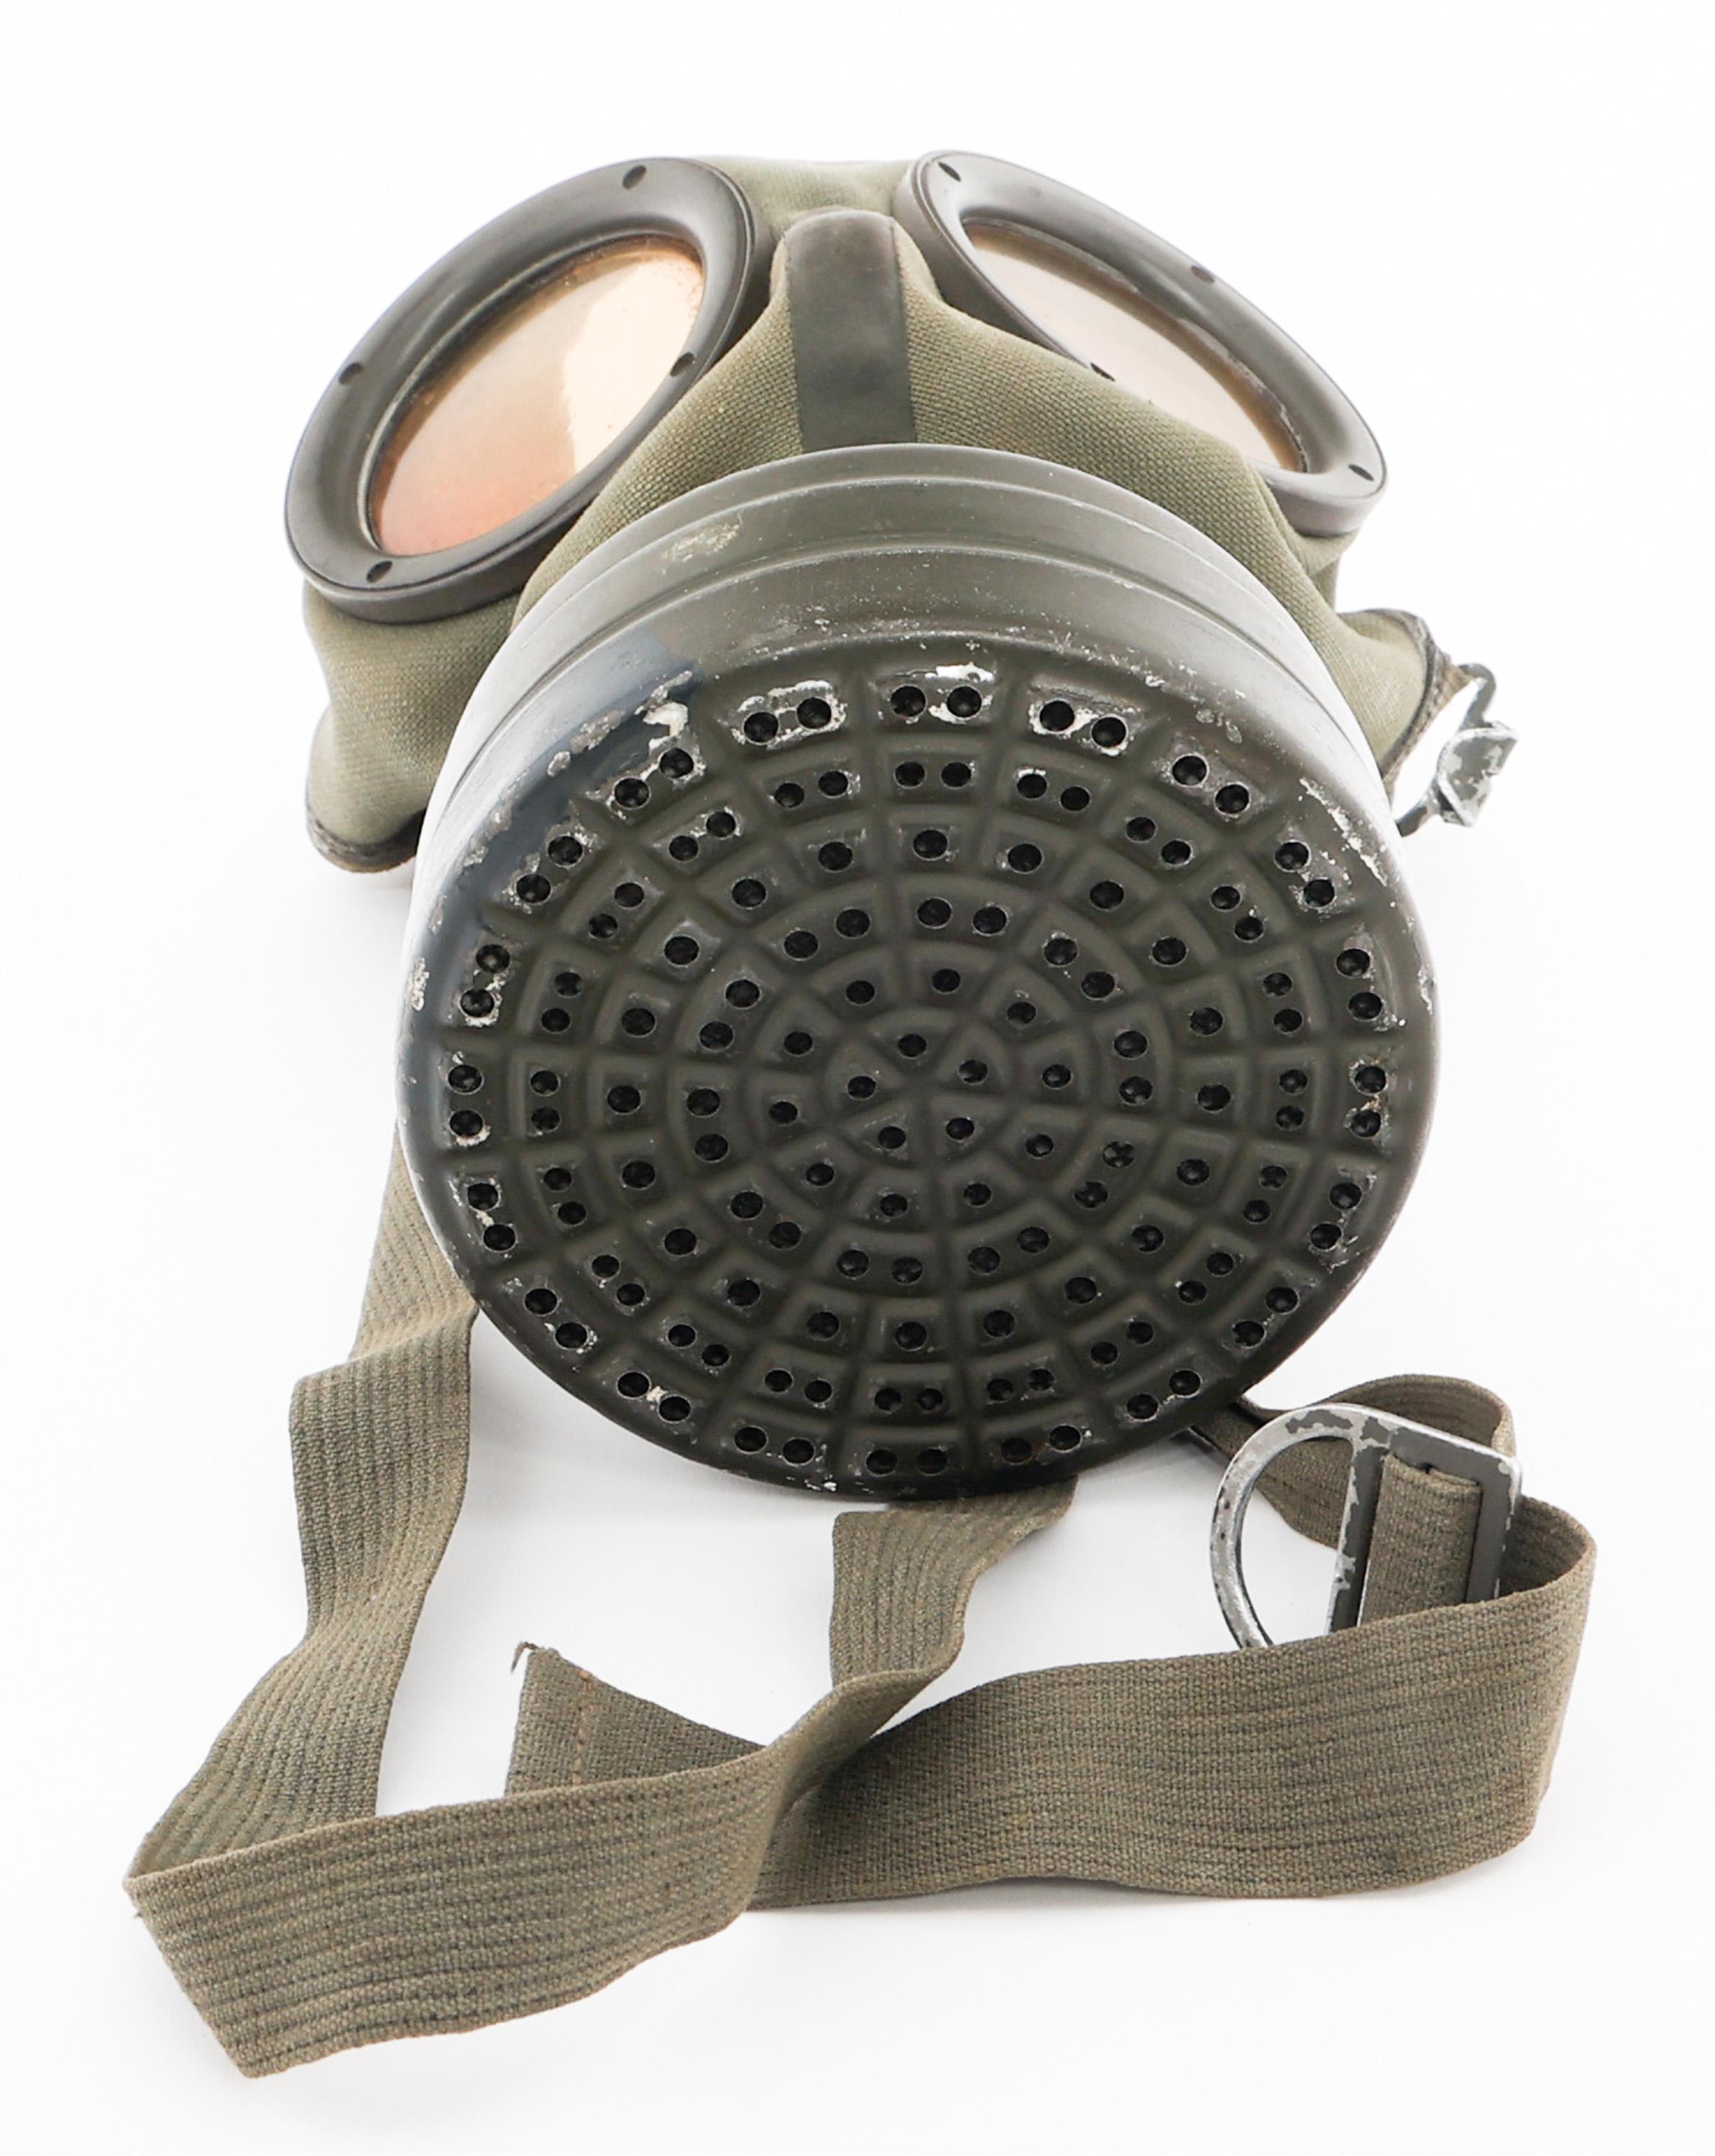 WWII GERMAN M38 GAS MASK & M42 CANTEEN